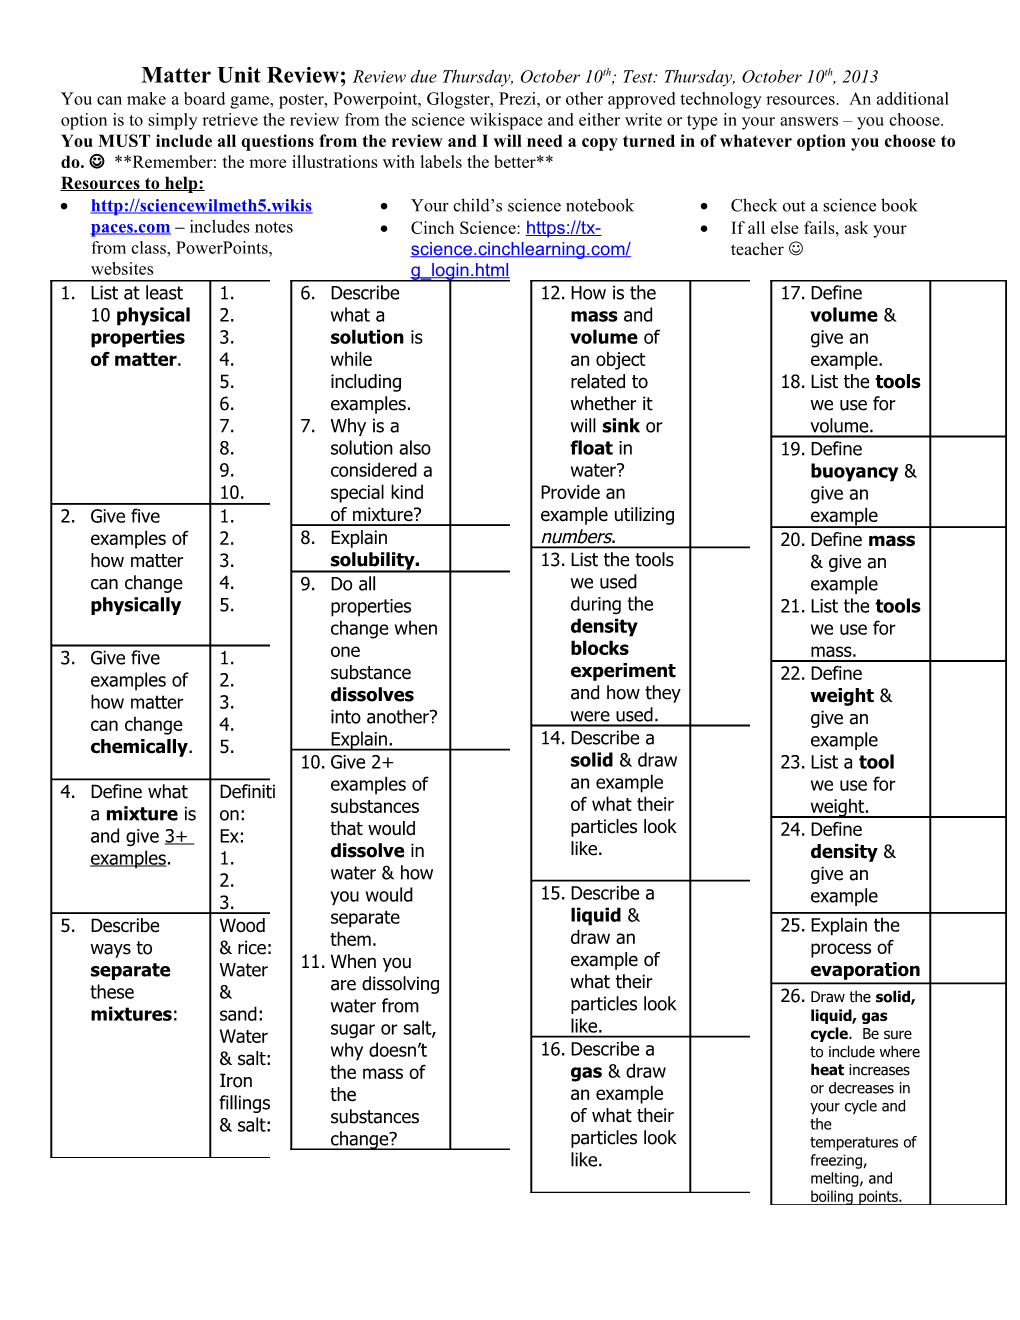 Spaced-Out Systems Review and Study Guide s2